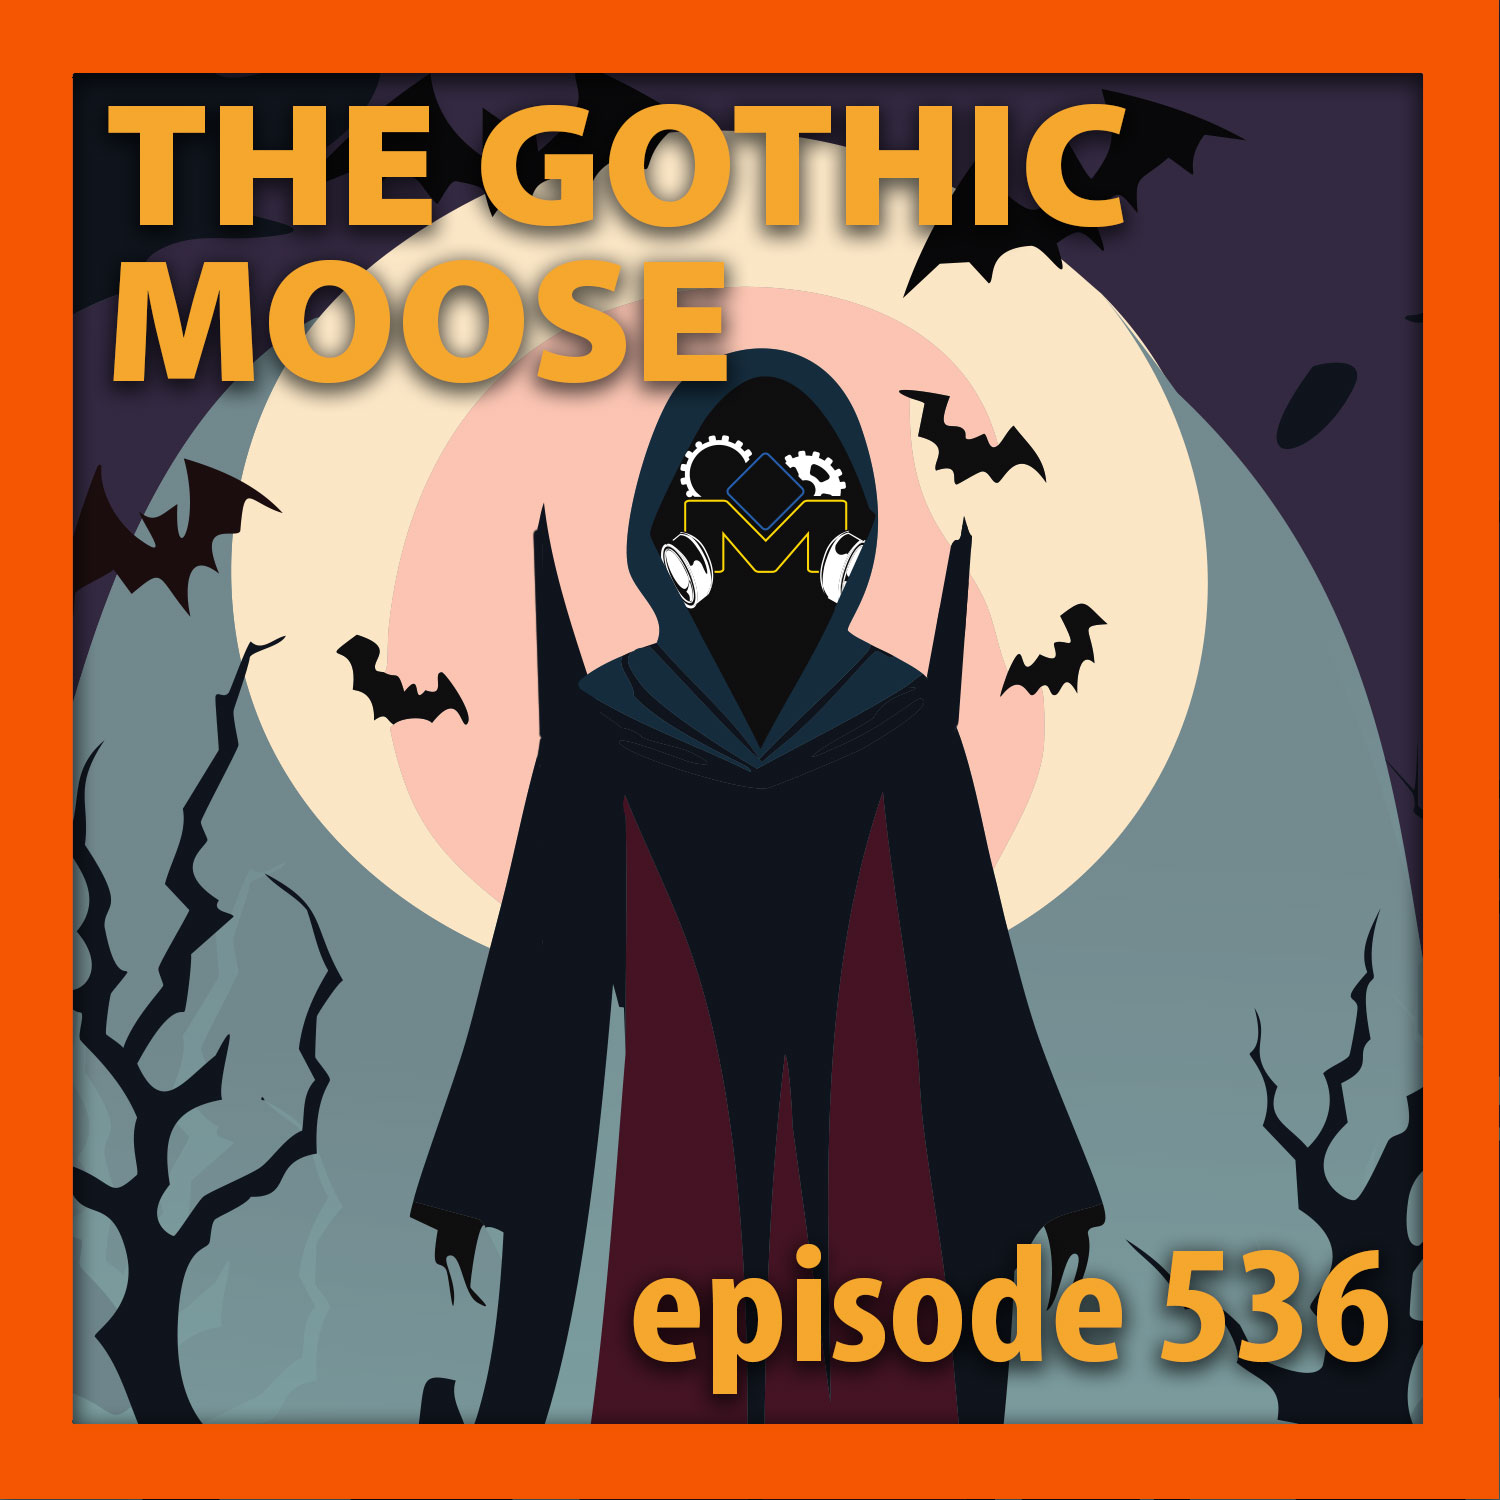 The Gothic Moose – Episode 536 – All Ukrainian bands or bands supporting Ukraine